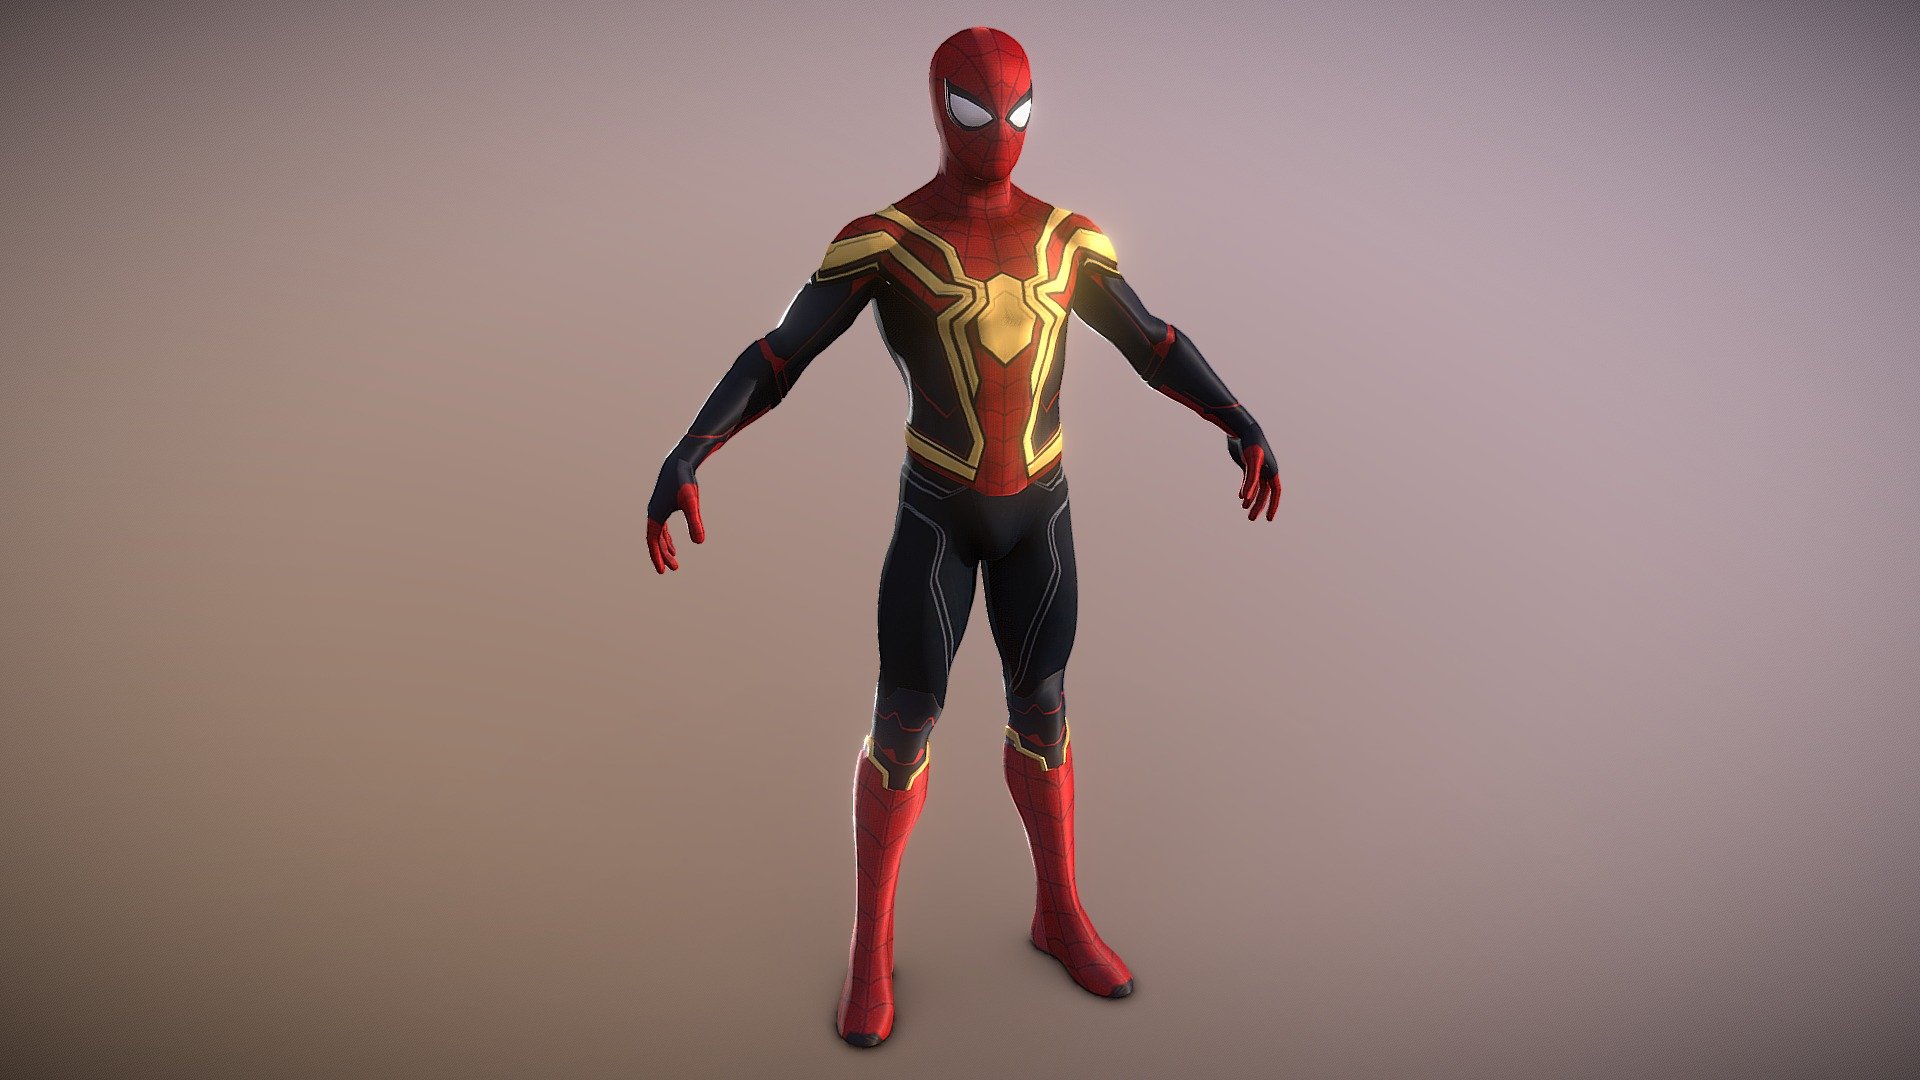 The Hybrid Suit consists of the MCU's Upgraded Suit with some nanites from the Iron Spider Suit added over it that form a golden spider emblem in the front and back of the suit. 
Spider-Man's Hybrid Suit is conceived after the nanites used to control Doctor Octopus' tentacles were retrieved back to Peter. Following May Parker's death at the hands of Raimi-Verse's Green Goblin, Peter uses this suit, with the help from his two older counterparts from modern Marvel live action universes prior to the Marvel Cinematic Universe to prepare for their final battle against all of the Spider-Man villains from other dimensions on Liberty Island where the Liberty Statue now has Captain America's Shield since his presumed sacrifice back in Avengers: Endgame. After Doctor Strange casts a spell to make the world forget Peter Parker had ever existed in order to send the villains and other Spider-Men home, Peter later abandons this suit in favor of a much simpler homemade suit lacking any Stark technology, - Spider-Man - Hybrid Suit - Download Free 3D model by Jako (@fairlight51) 3d model